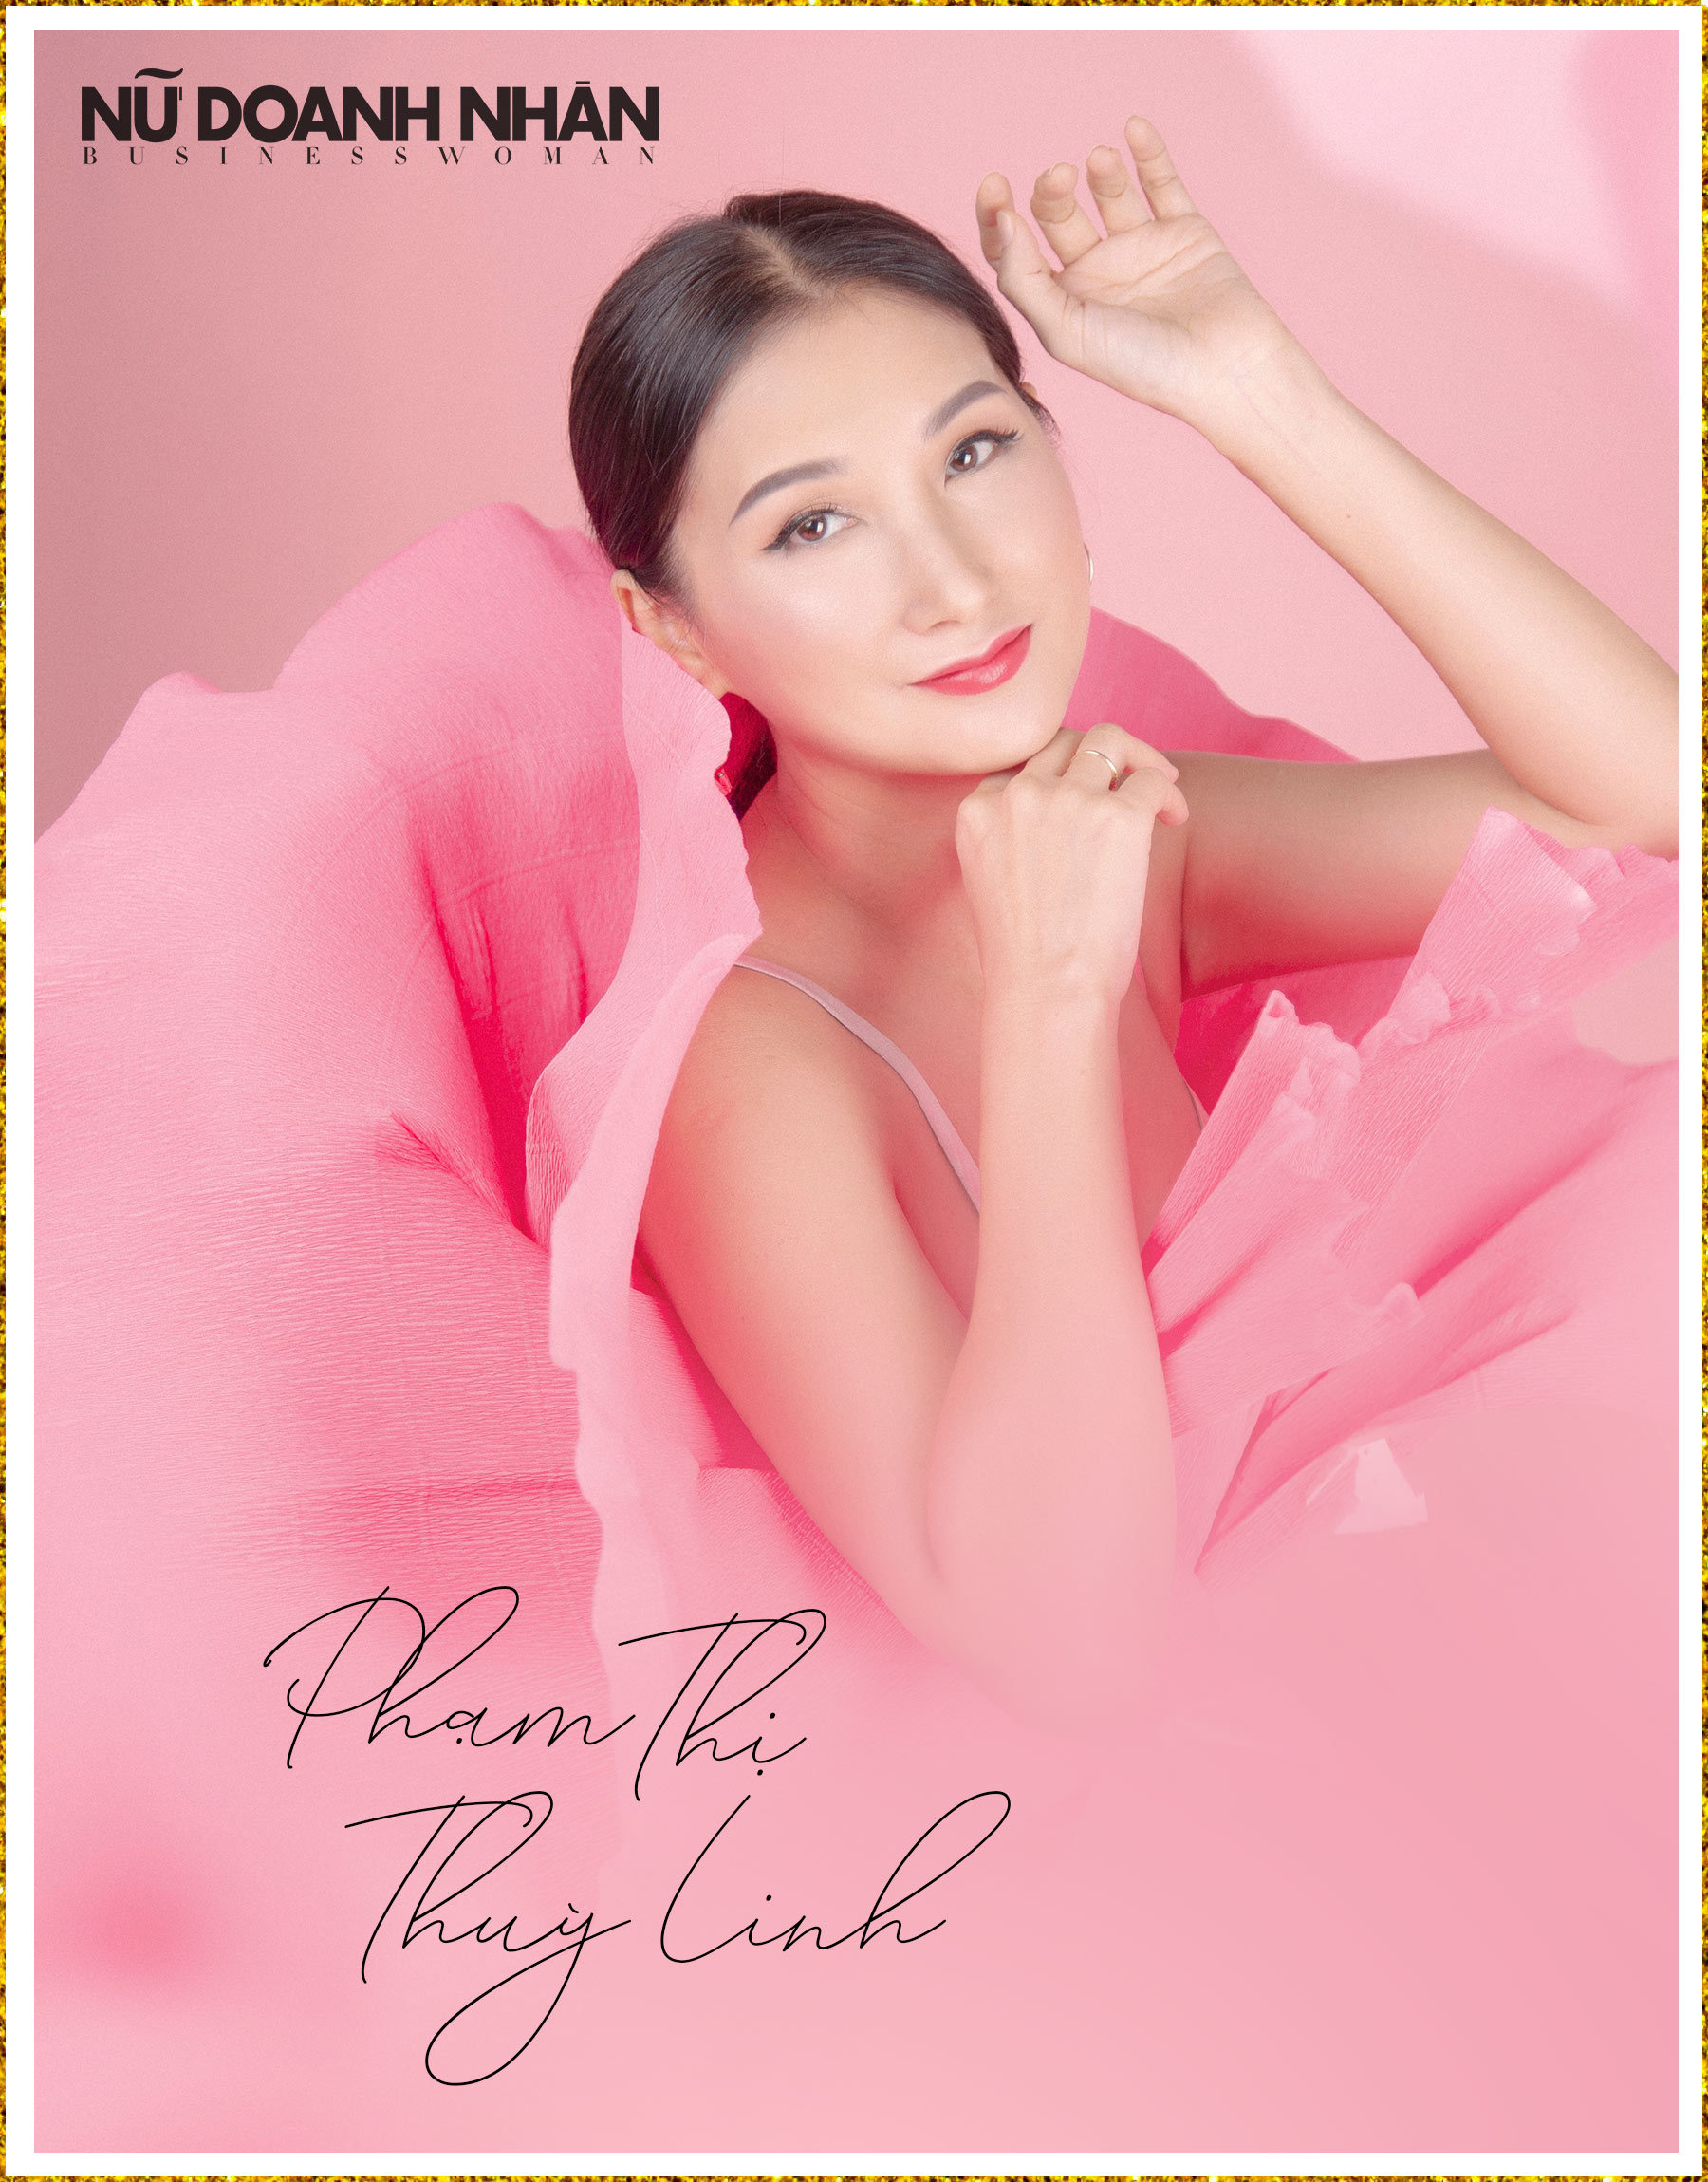 Estee Lauder Time to End breast cancer ung thu vu